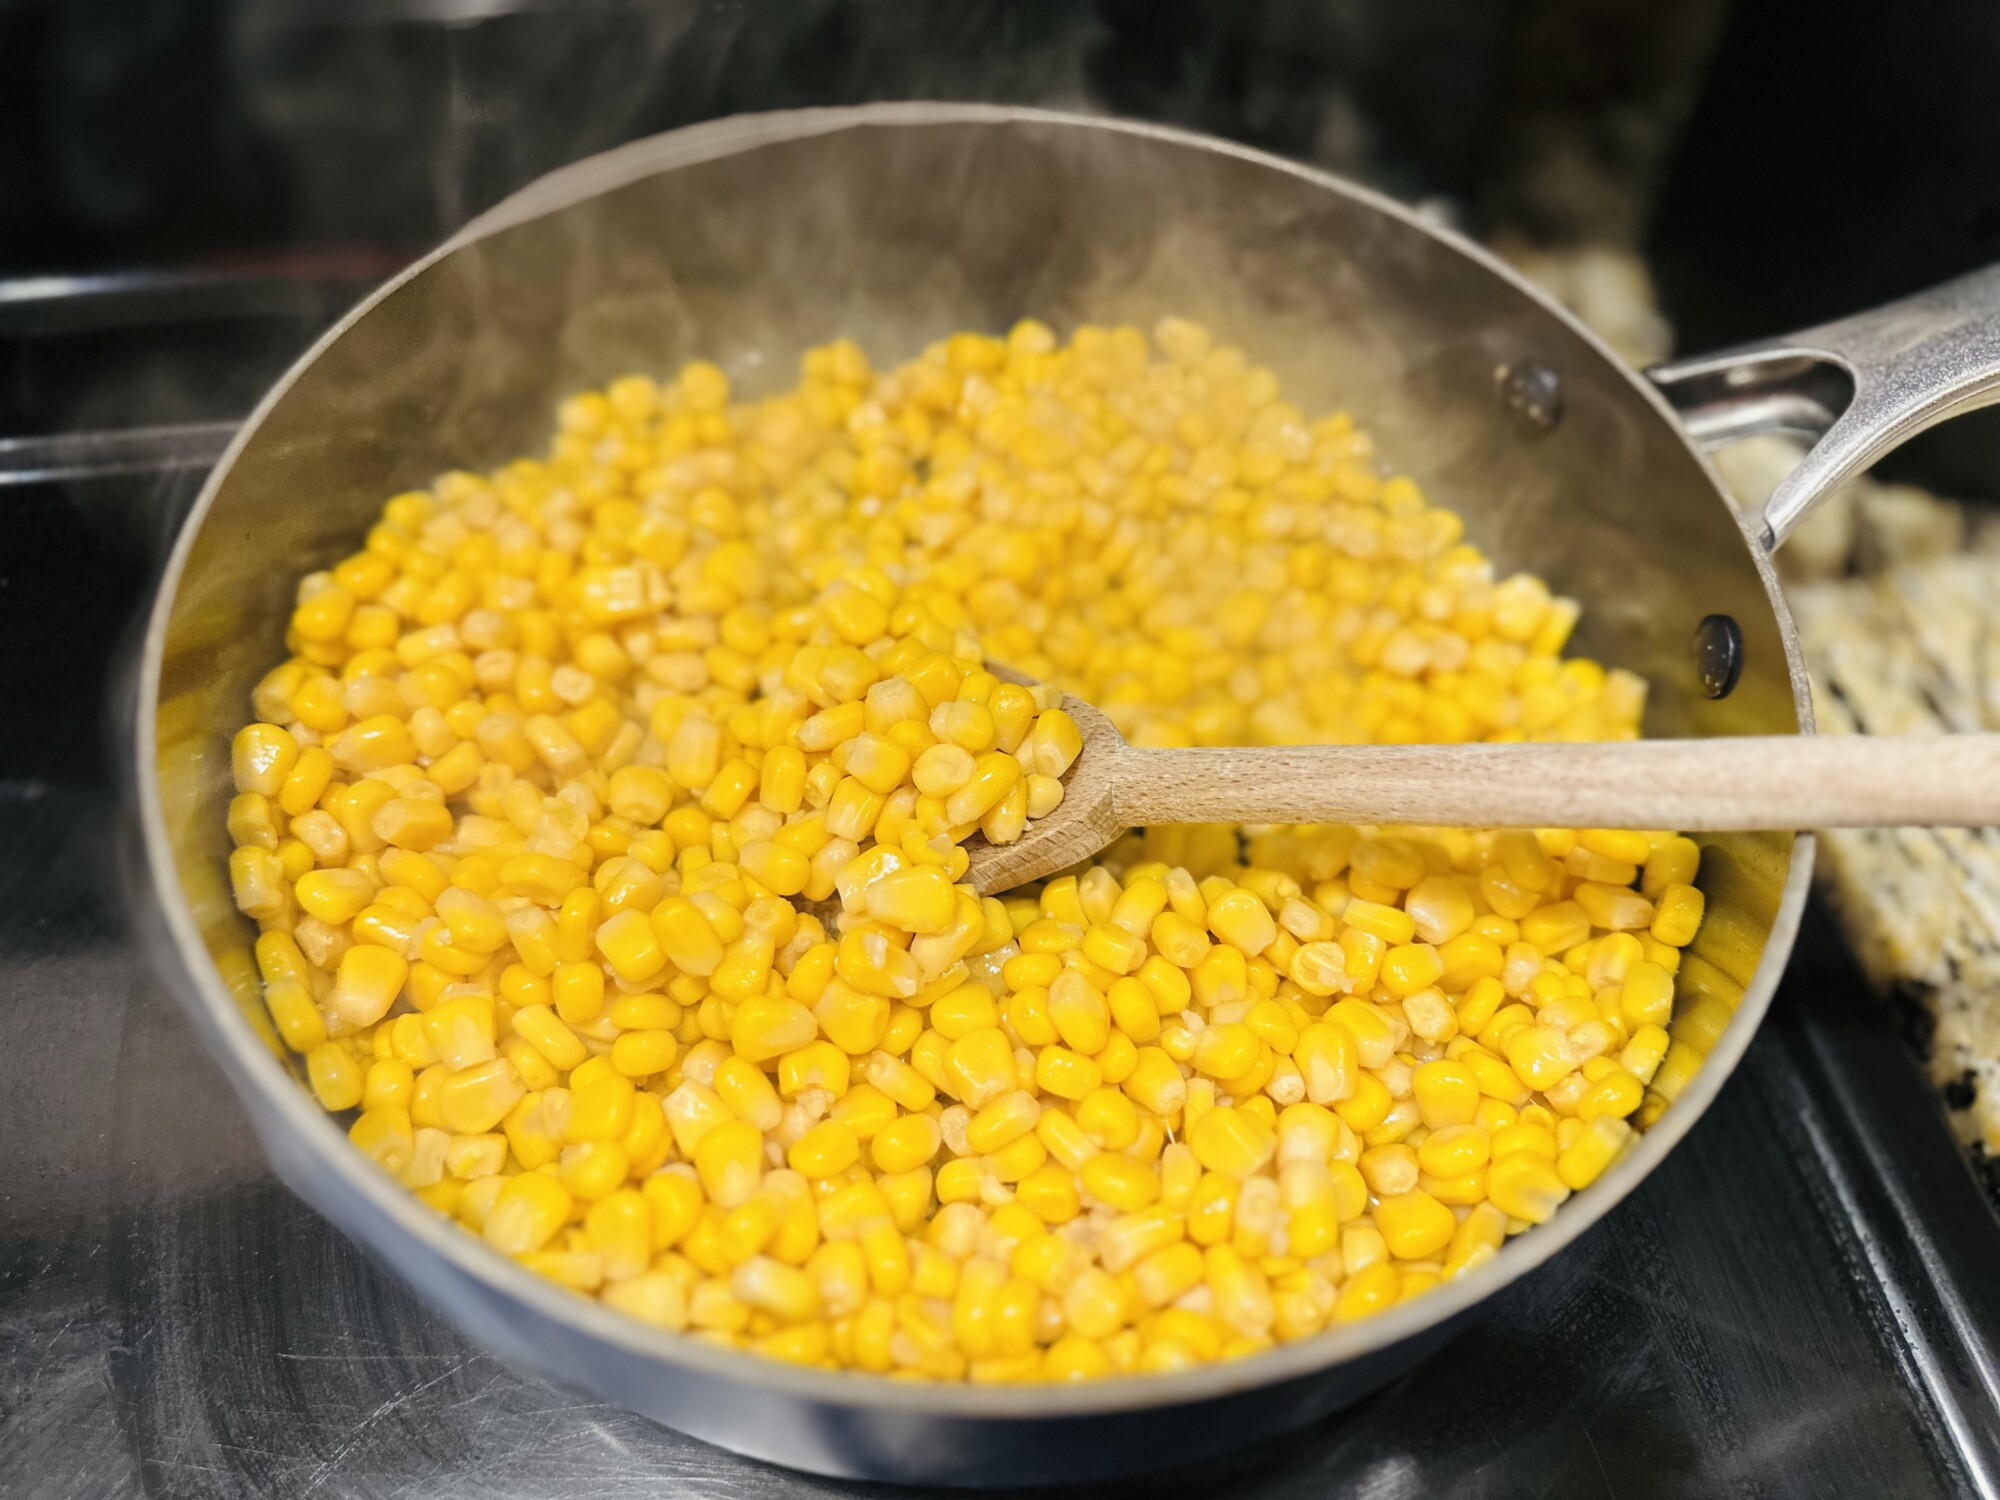 Craving a taste of Mexico? Try our delightful Mexican-Inspired Corn Salad Recipe 🌽🥗 Perfect for summer BBQs and fully customizable to your taste! Discover the rich cultural significance of corn in Mexican cuisine. #MexicanInspired #CornSalad #SummerRecipes #CulturalCuisine